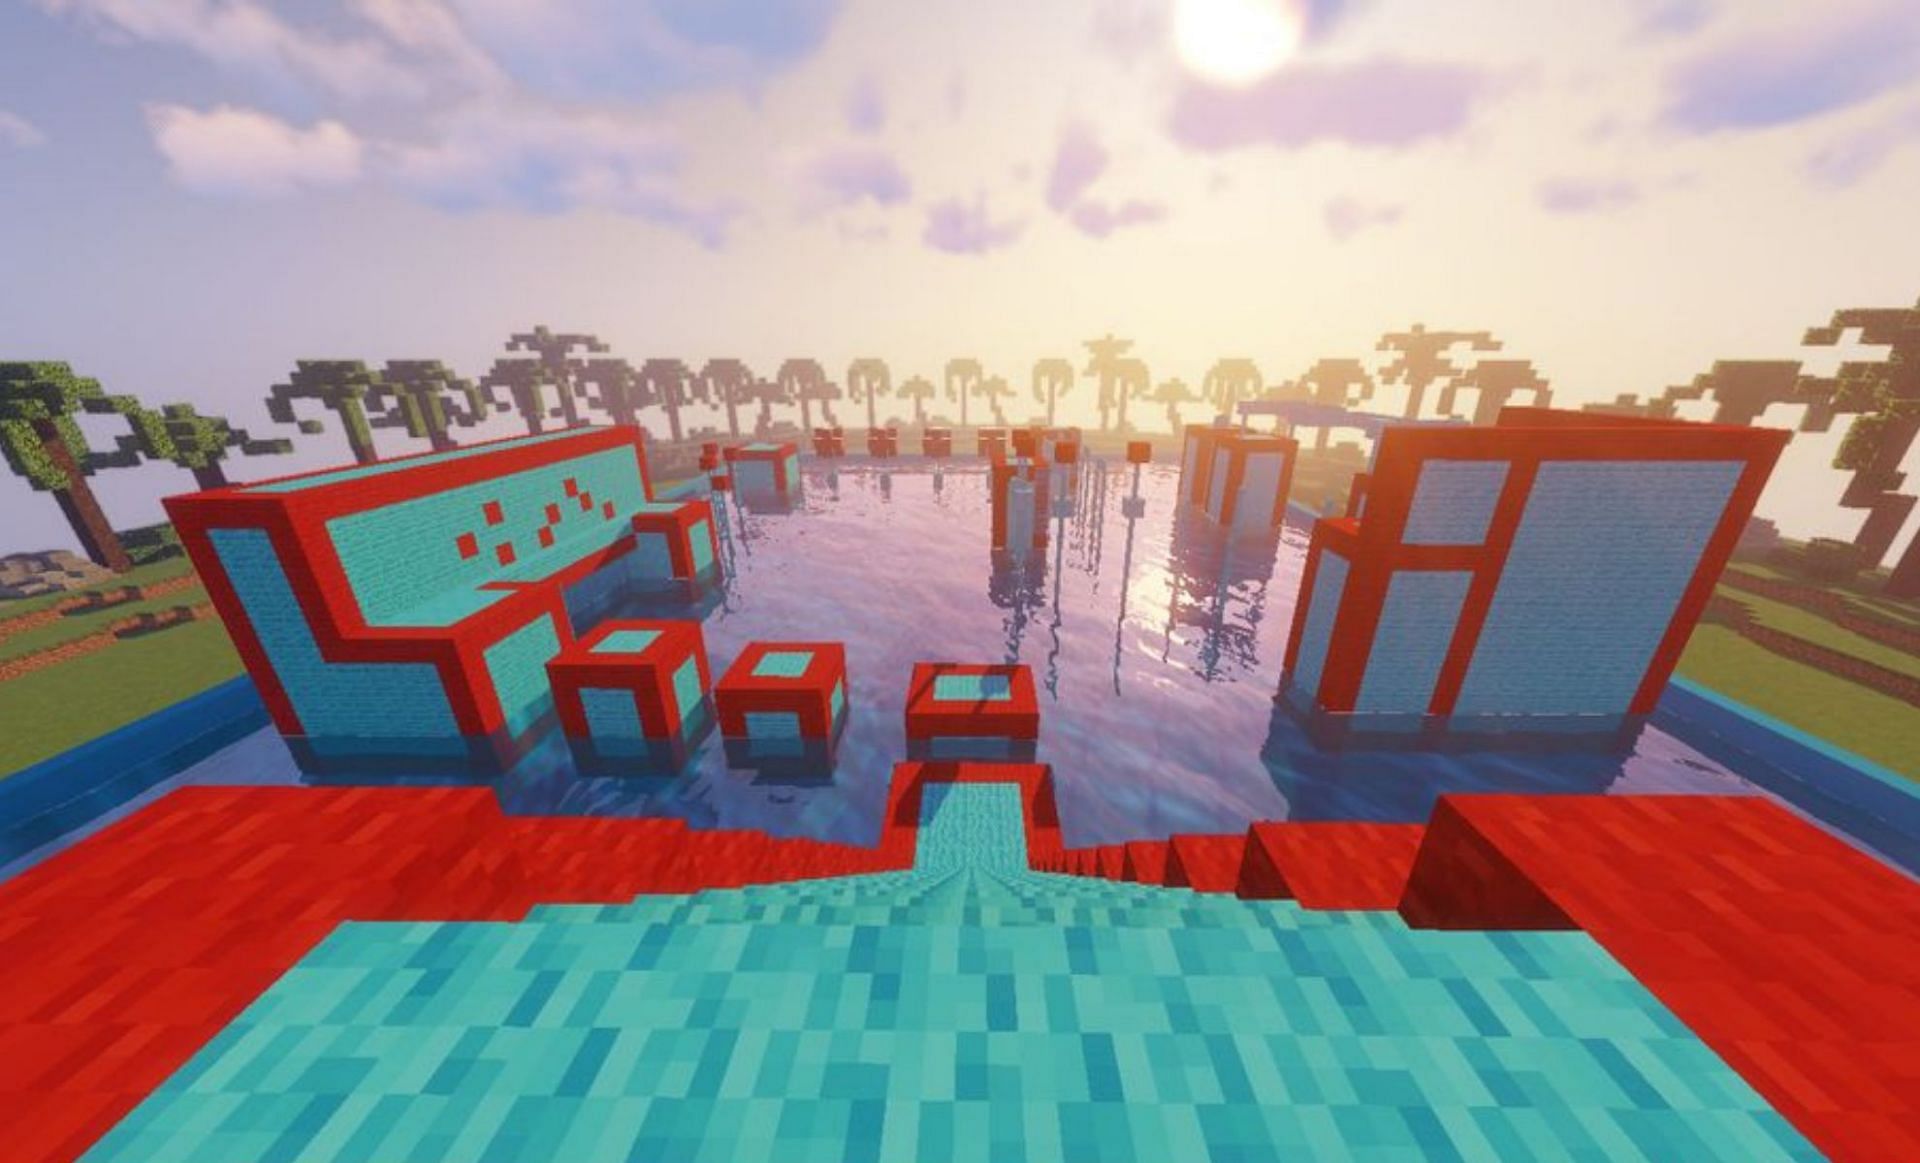 Wipeout course (Image via 9Minecraft)